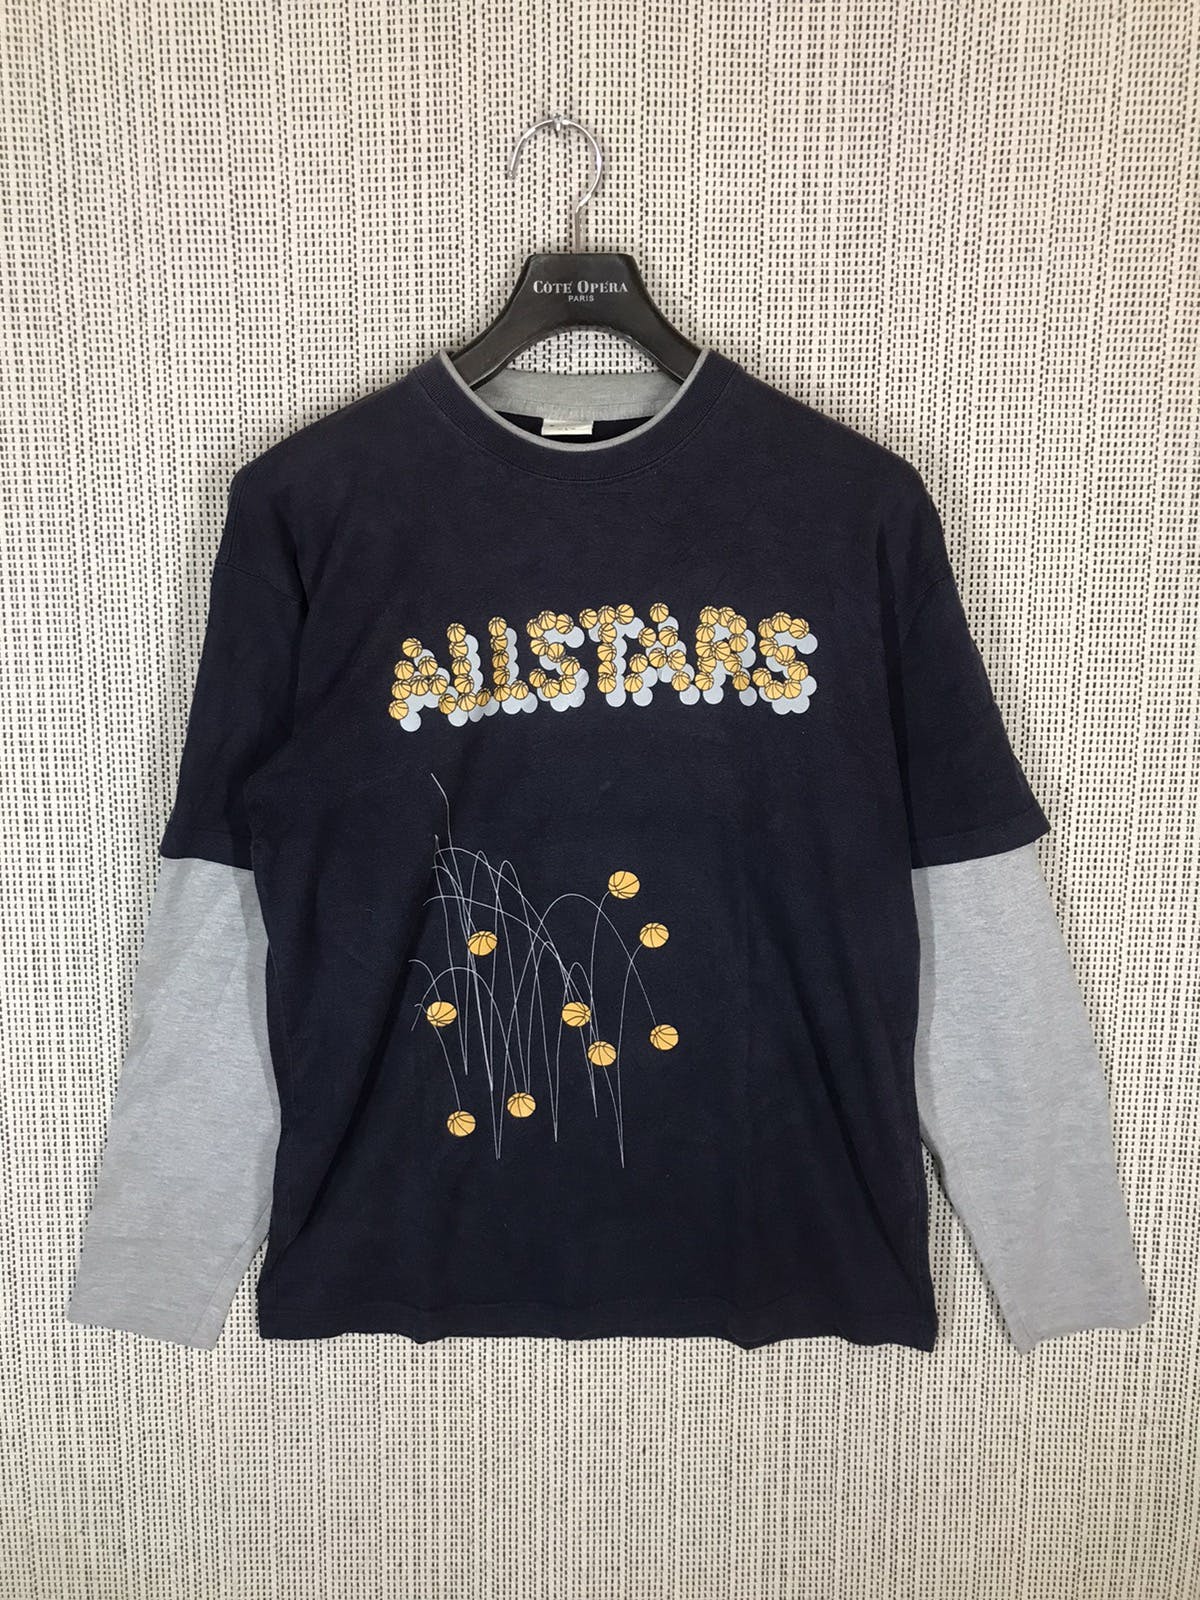 ‼️VINTAGE CONVERSE ALL STAR BASKETBALL DOUBLE SLEEVE‼️ - 1